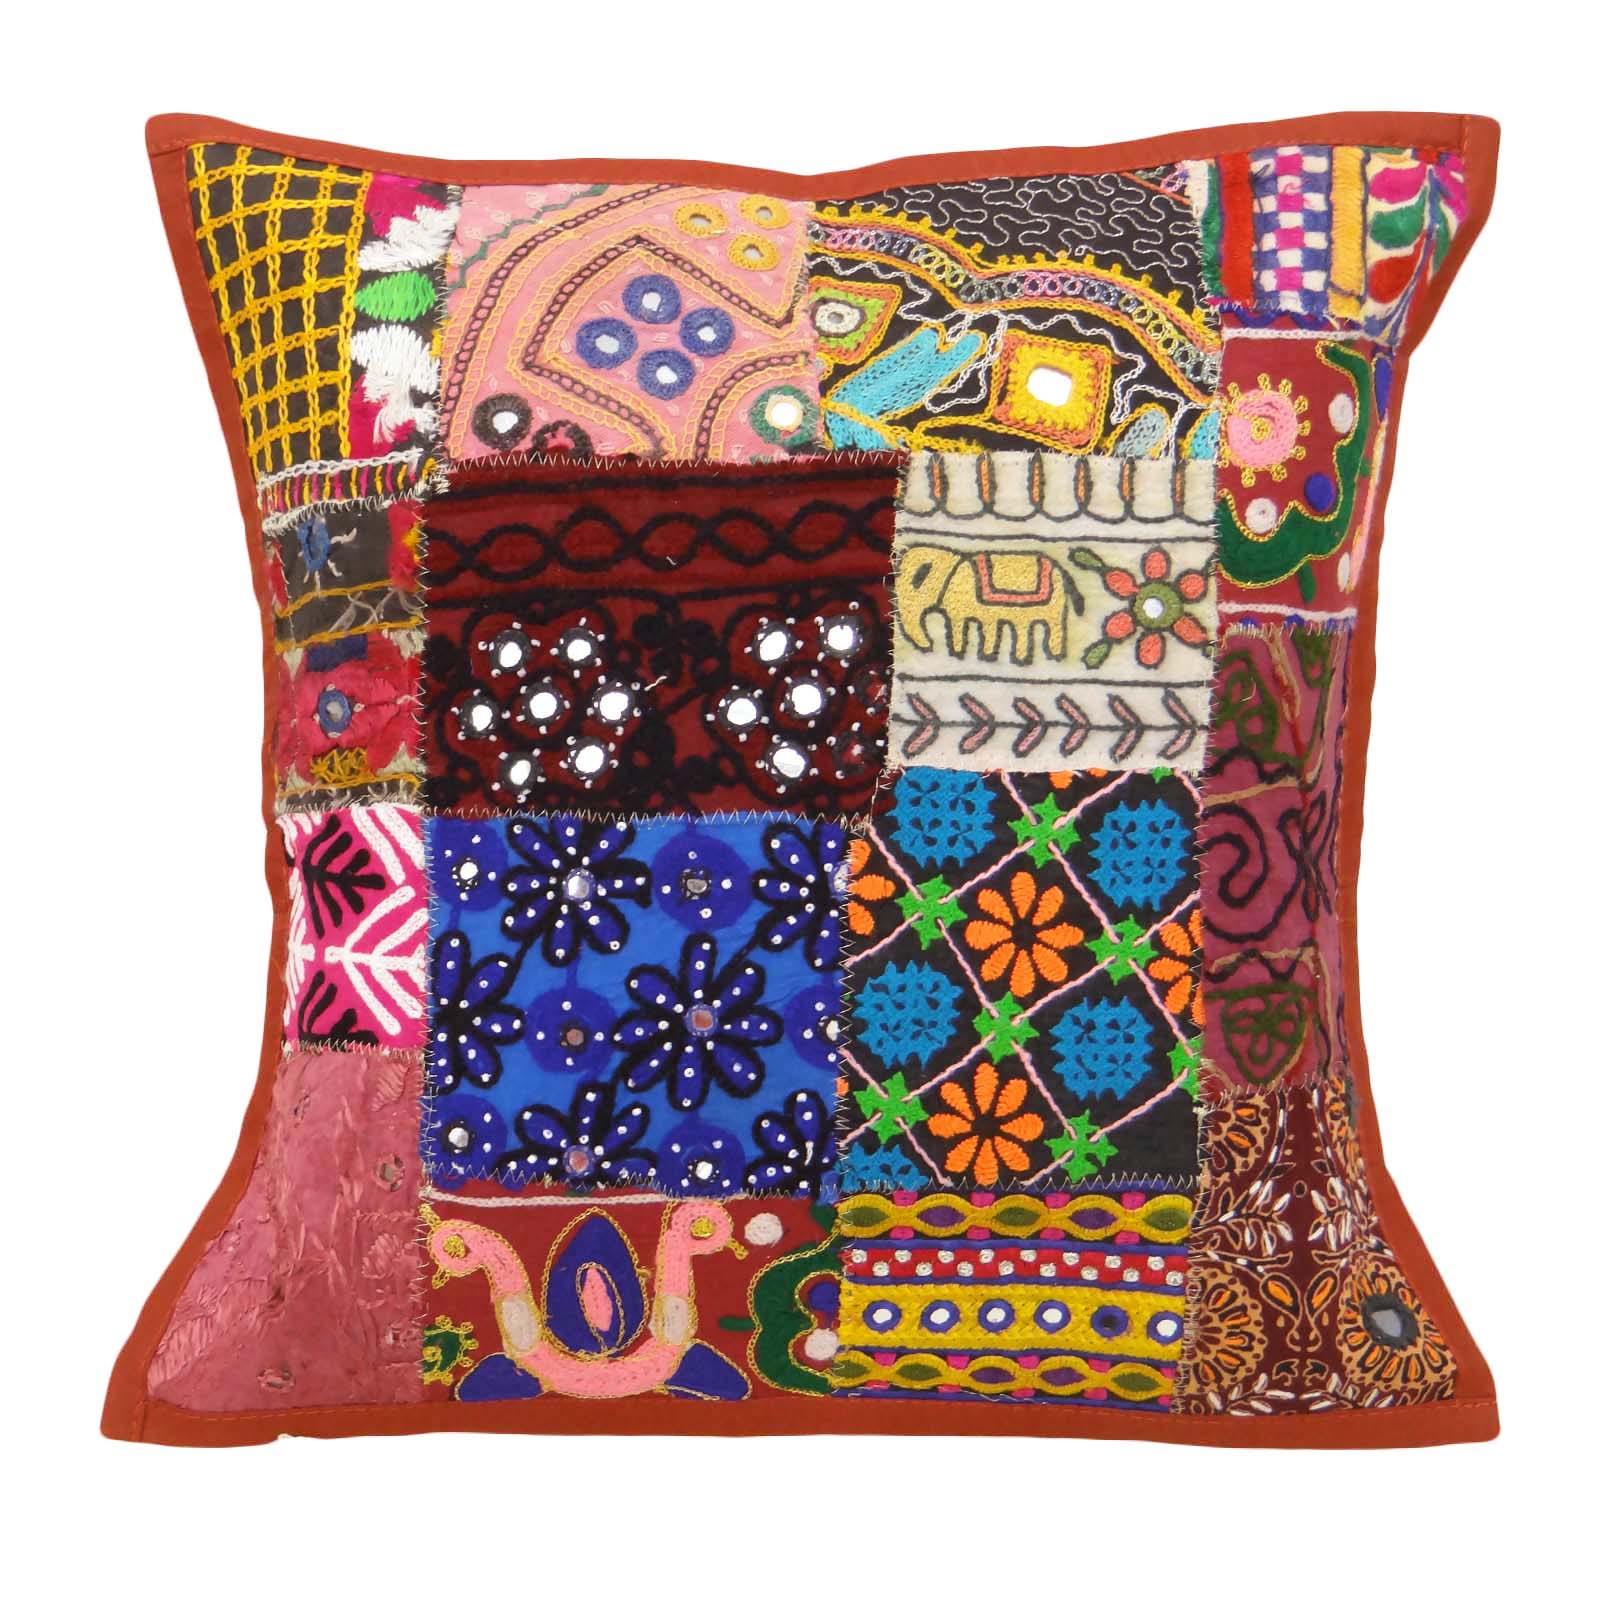 Sofa Cushion Covers Multicolor Indian Kutch Throw Pillow Ethnic Pillow 17 X 17